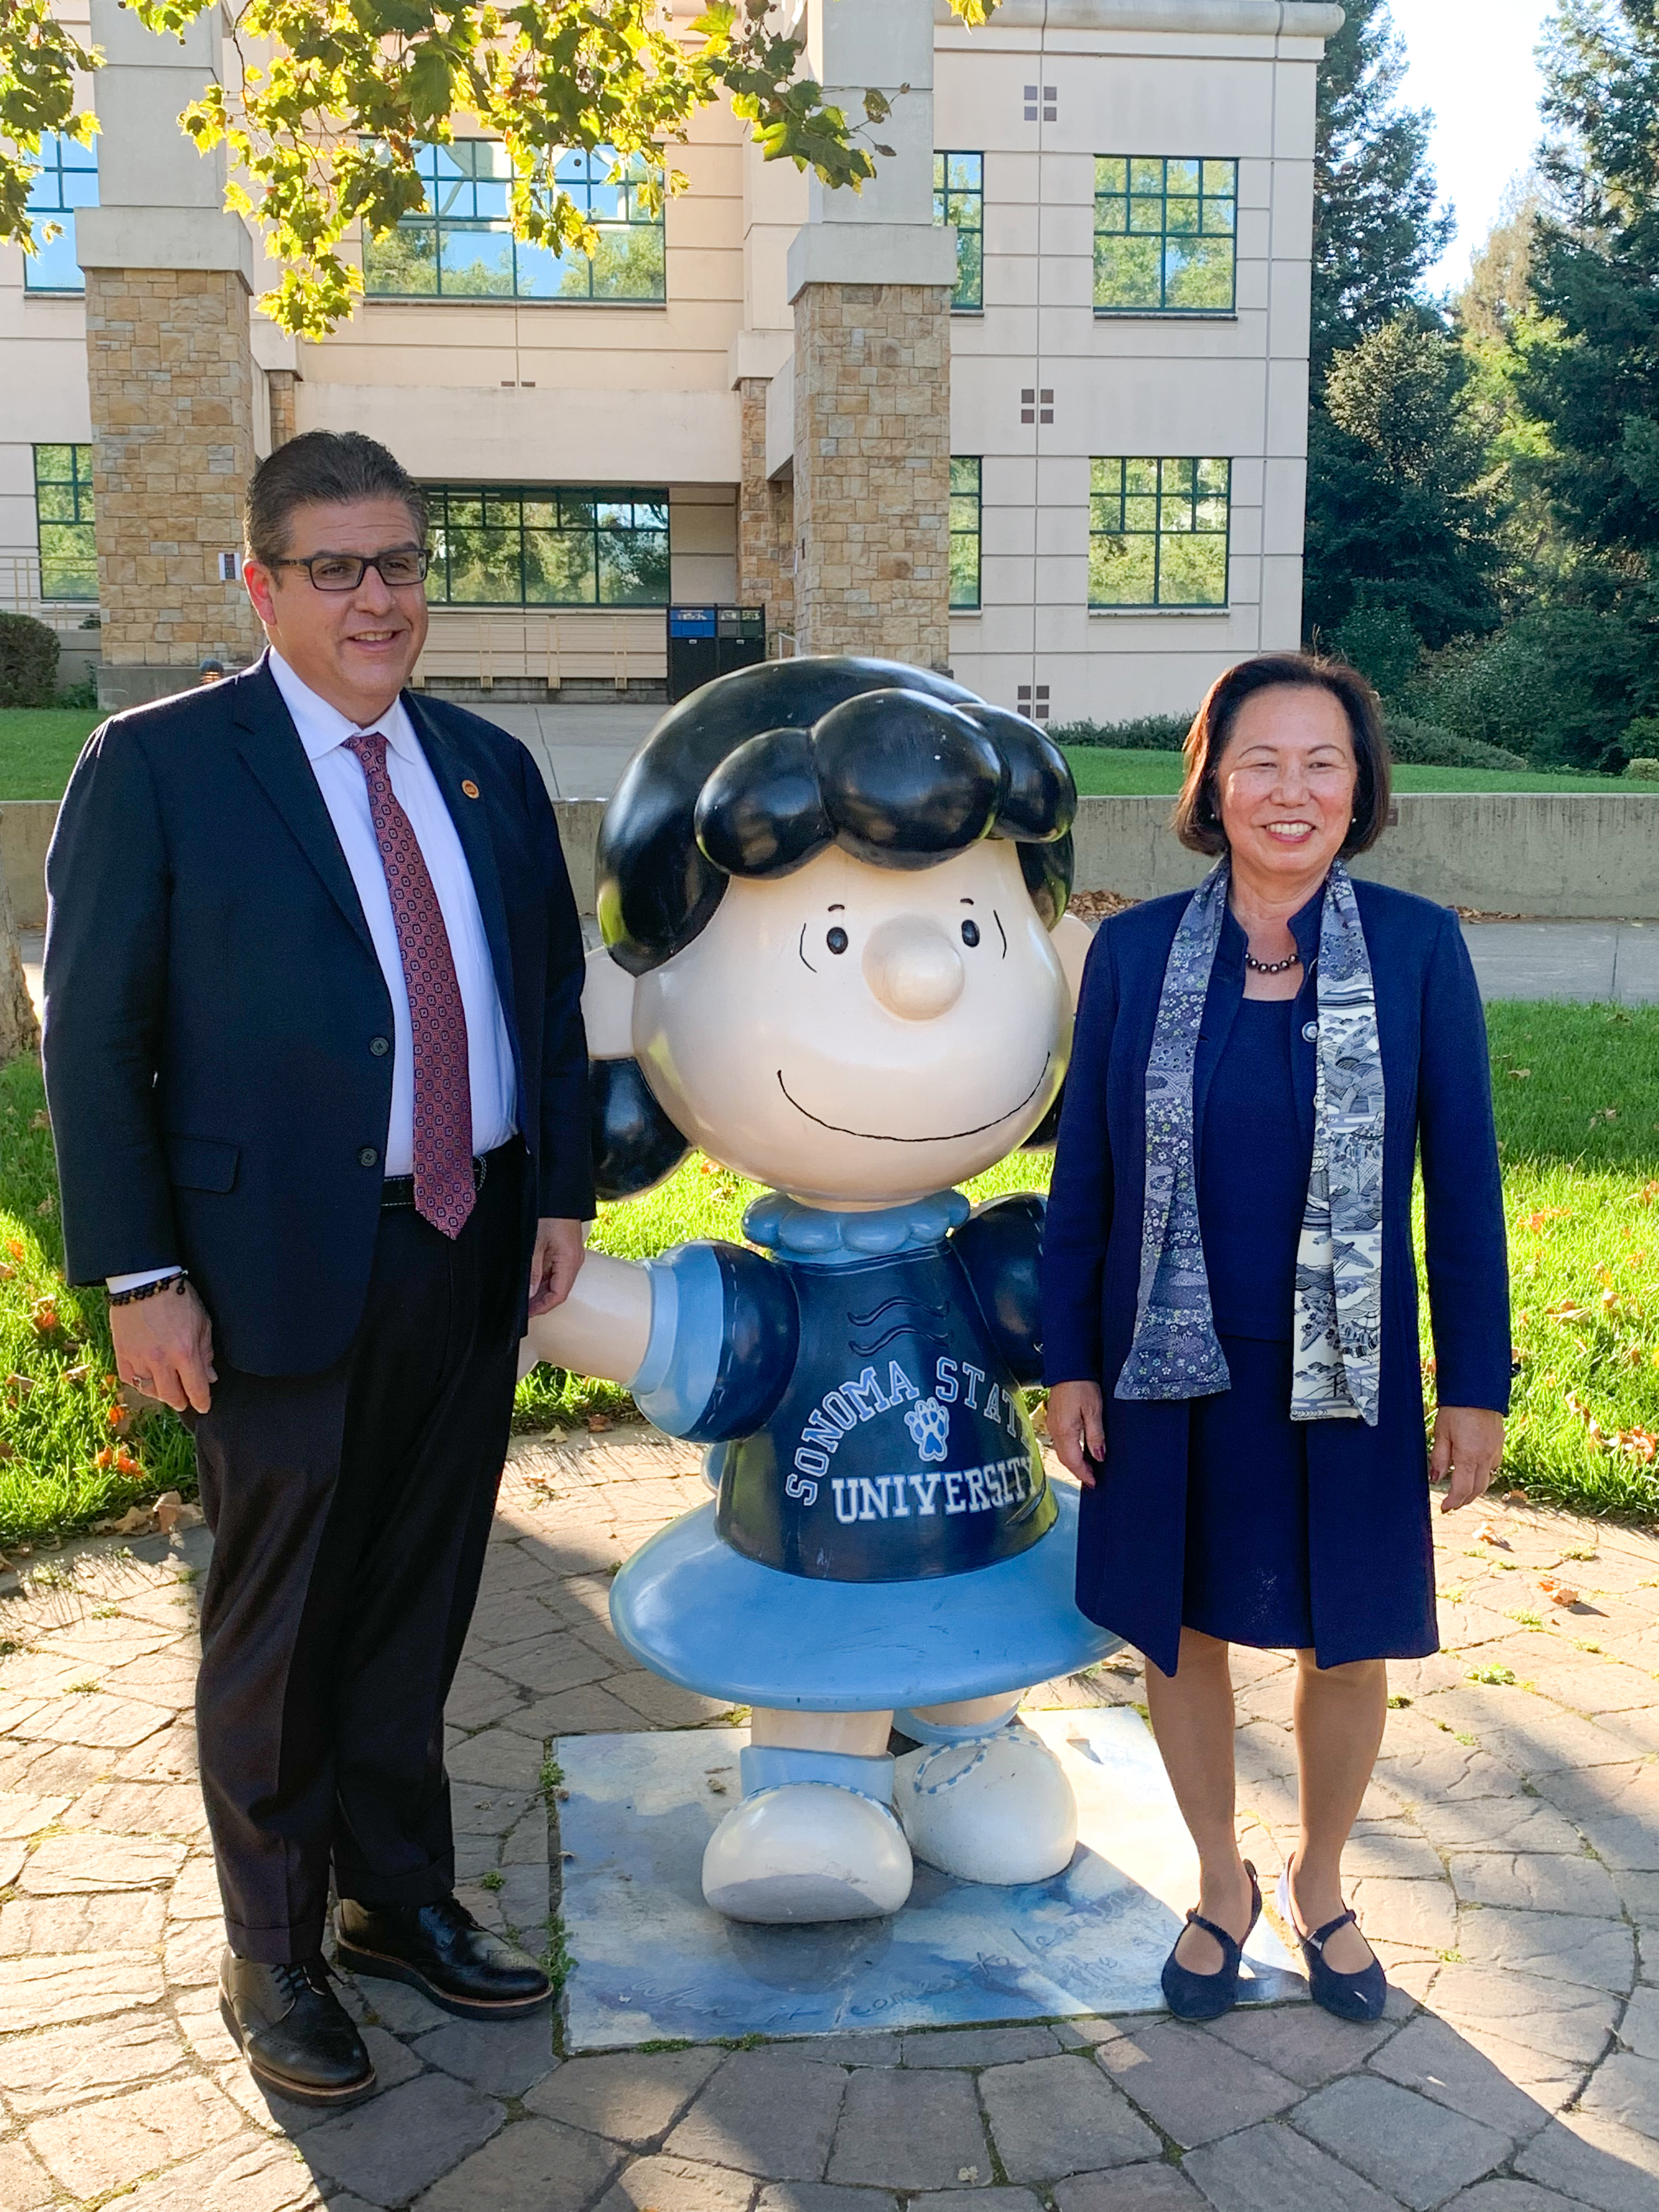 Chancellor Castro poses for photo with President Sakaki at the Lucy statue